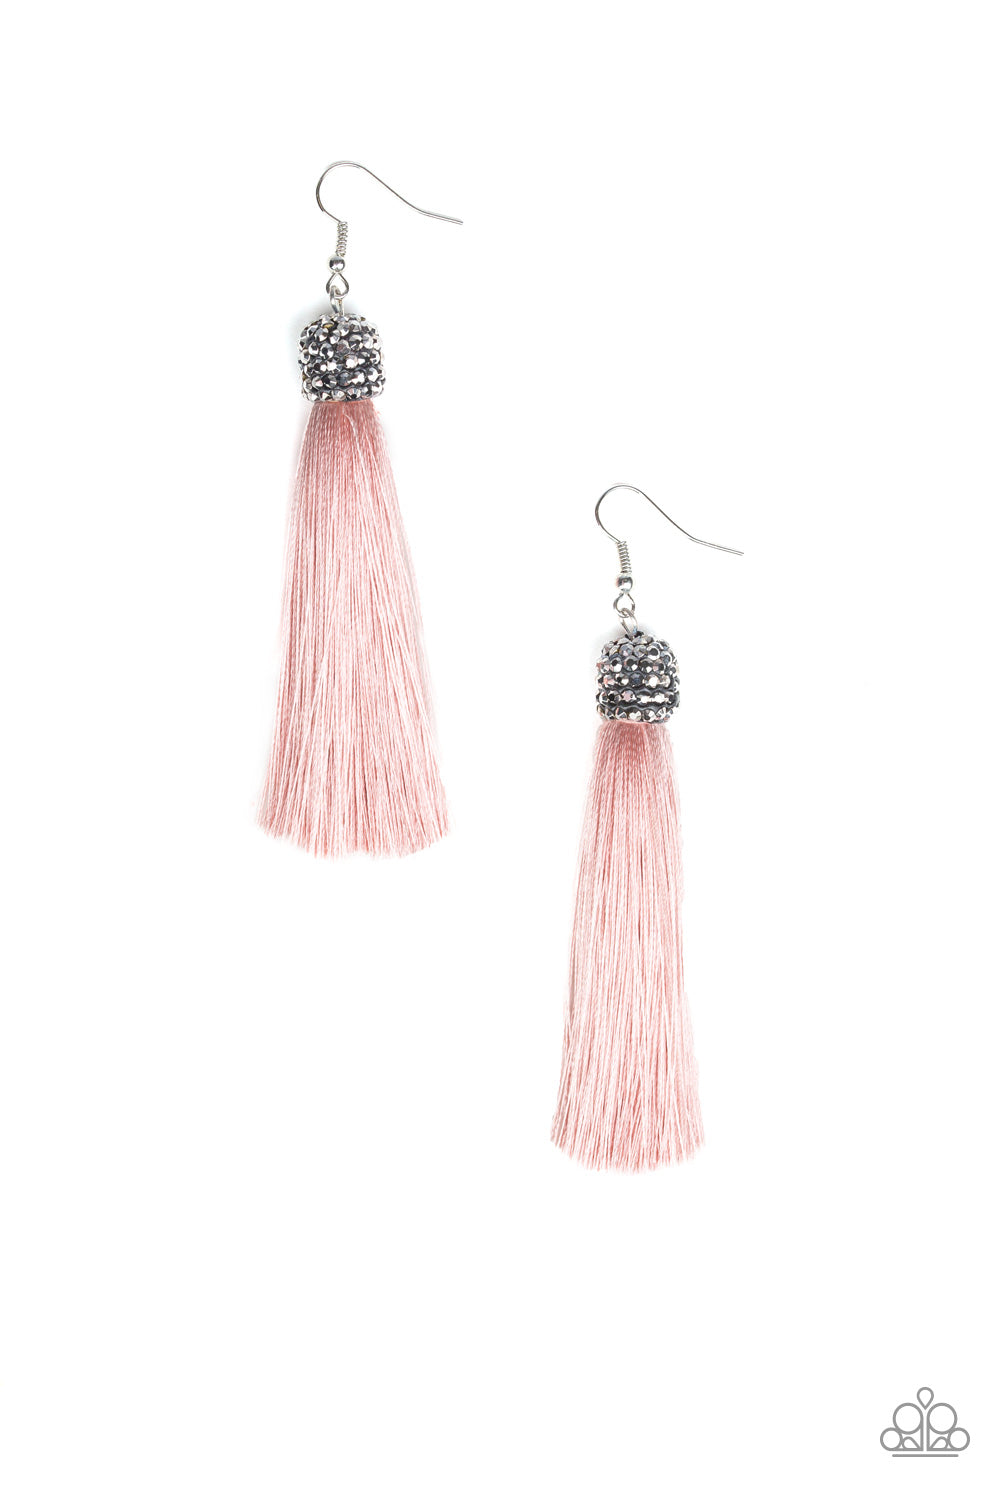 Make Room For Plume Pink Paparazzi Earrings Cashmere Pink Jewels - Cashmere Pink Jewels & Accessories, Cashmere Pink Jewels & Accessories - Paparazzi